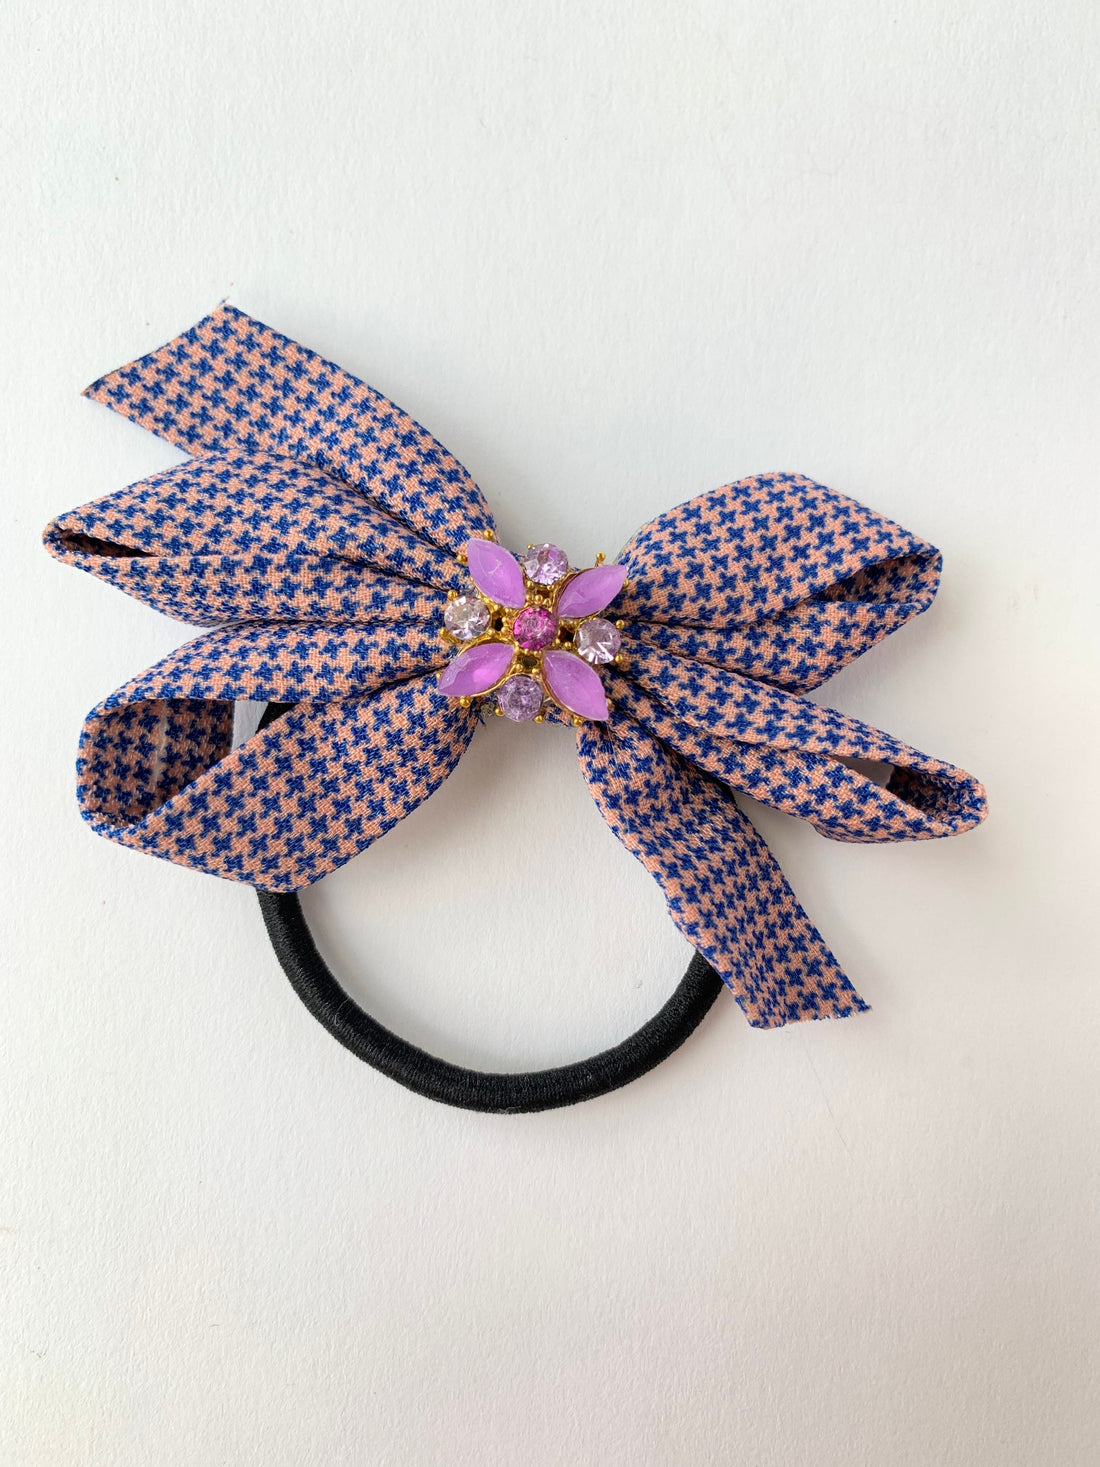 Lenora Dame Uptown Girl Hair Ties - 6 Color Options Available